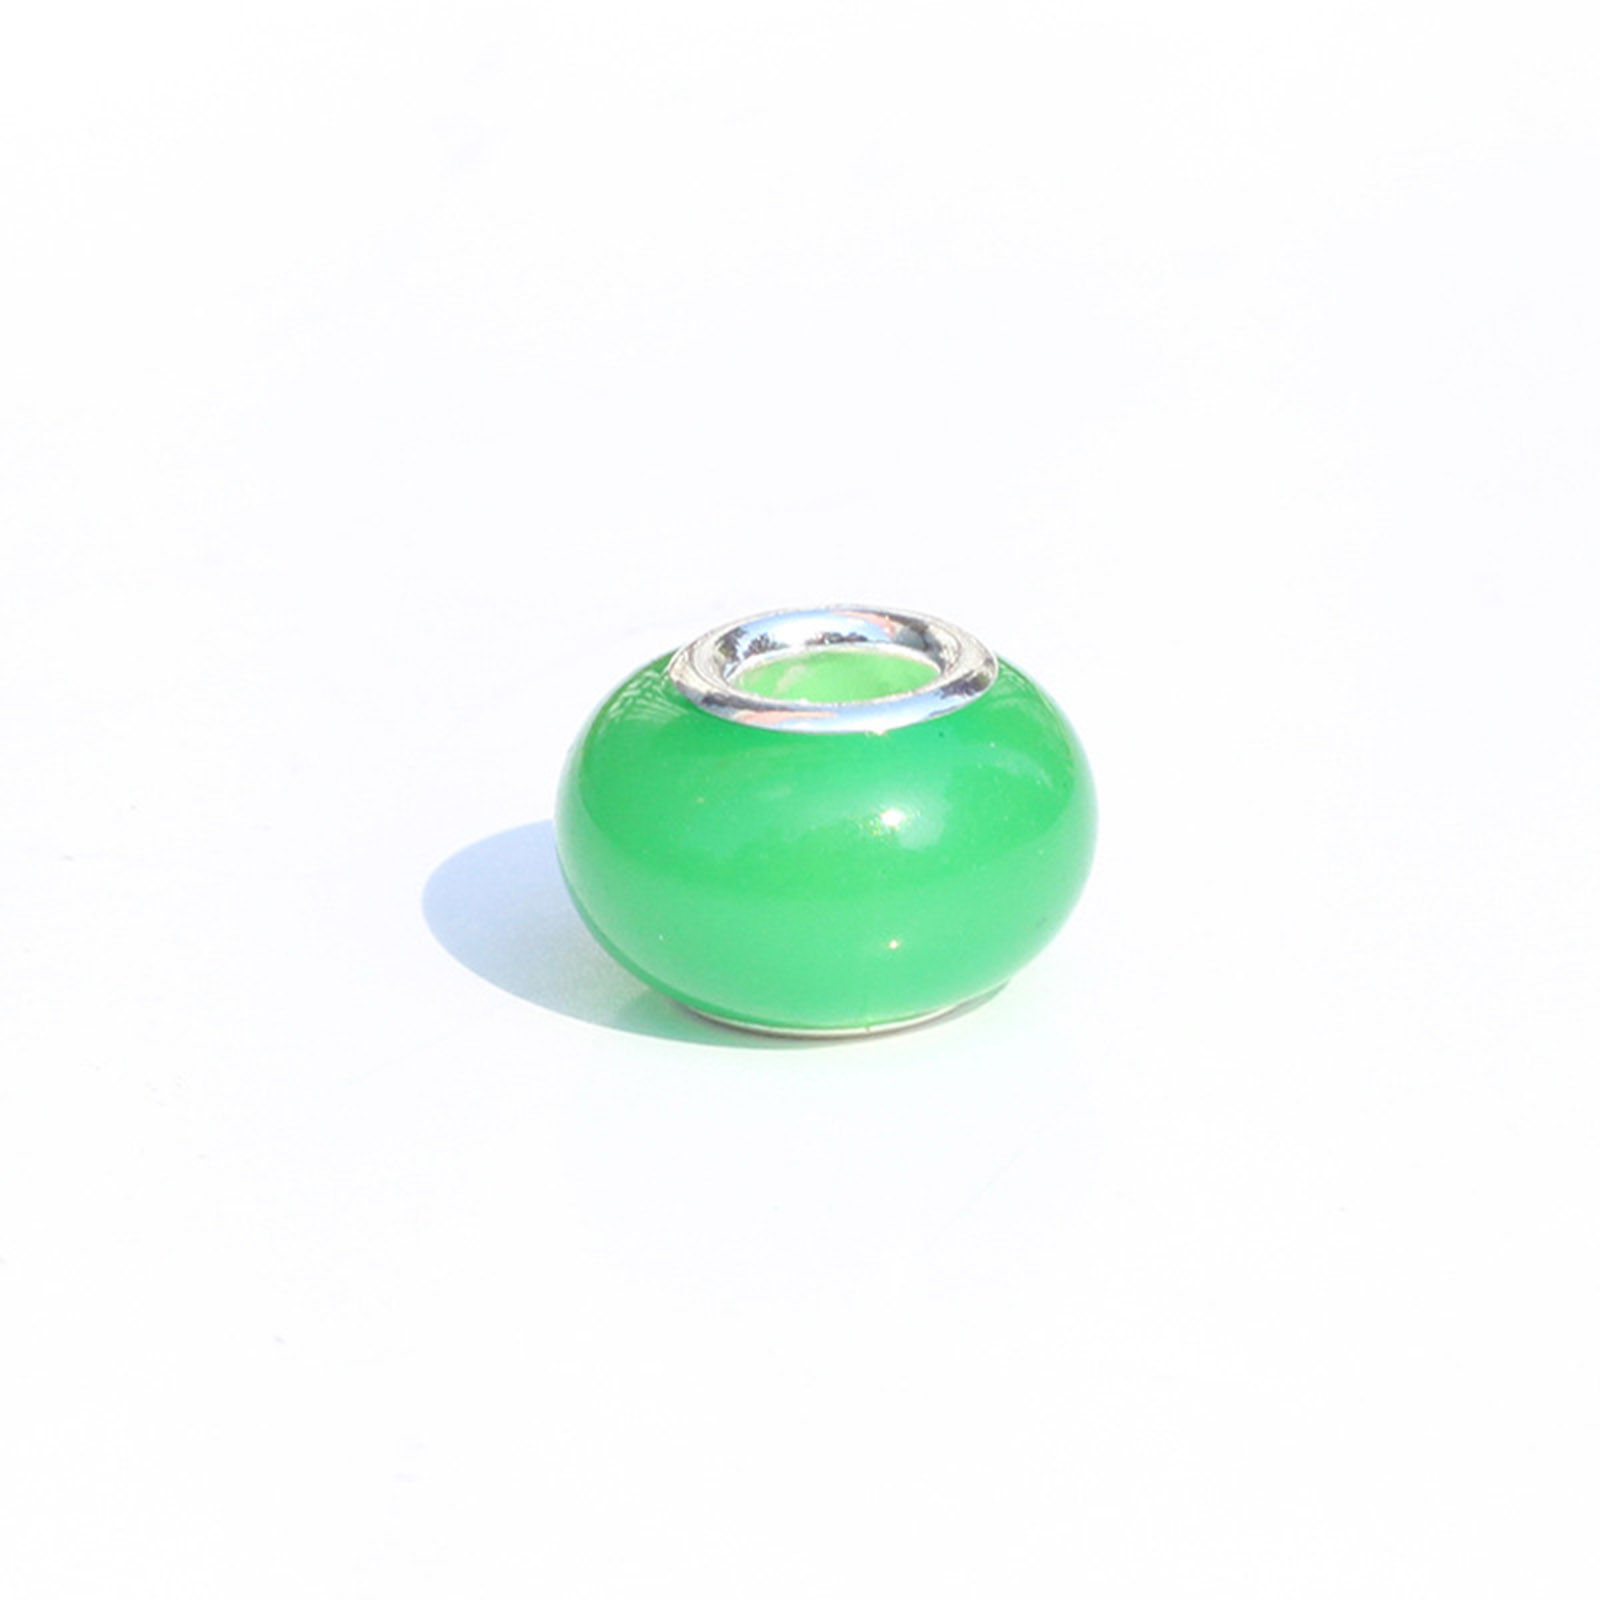 Picture of Resin European Style Large Hole Charm Beads Green Round Glow In The Dark Luminous 14mm x 9mm, Hole: Approx 5mm, 20 PCs